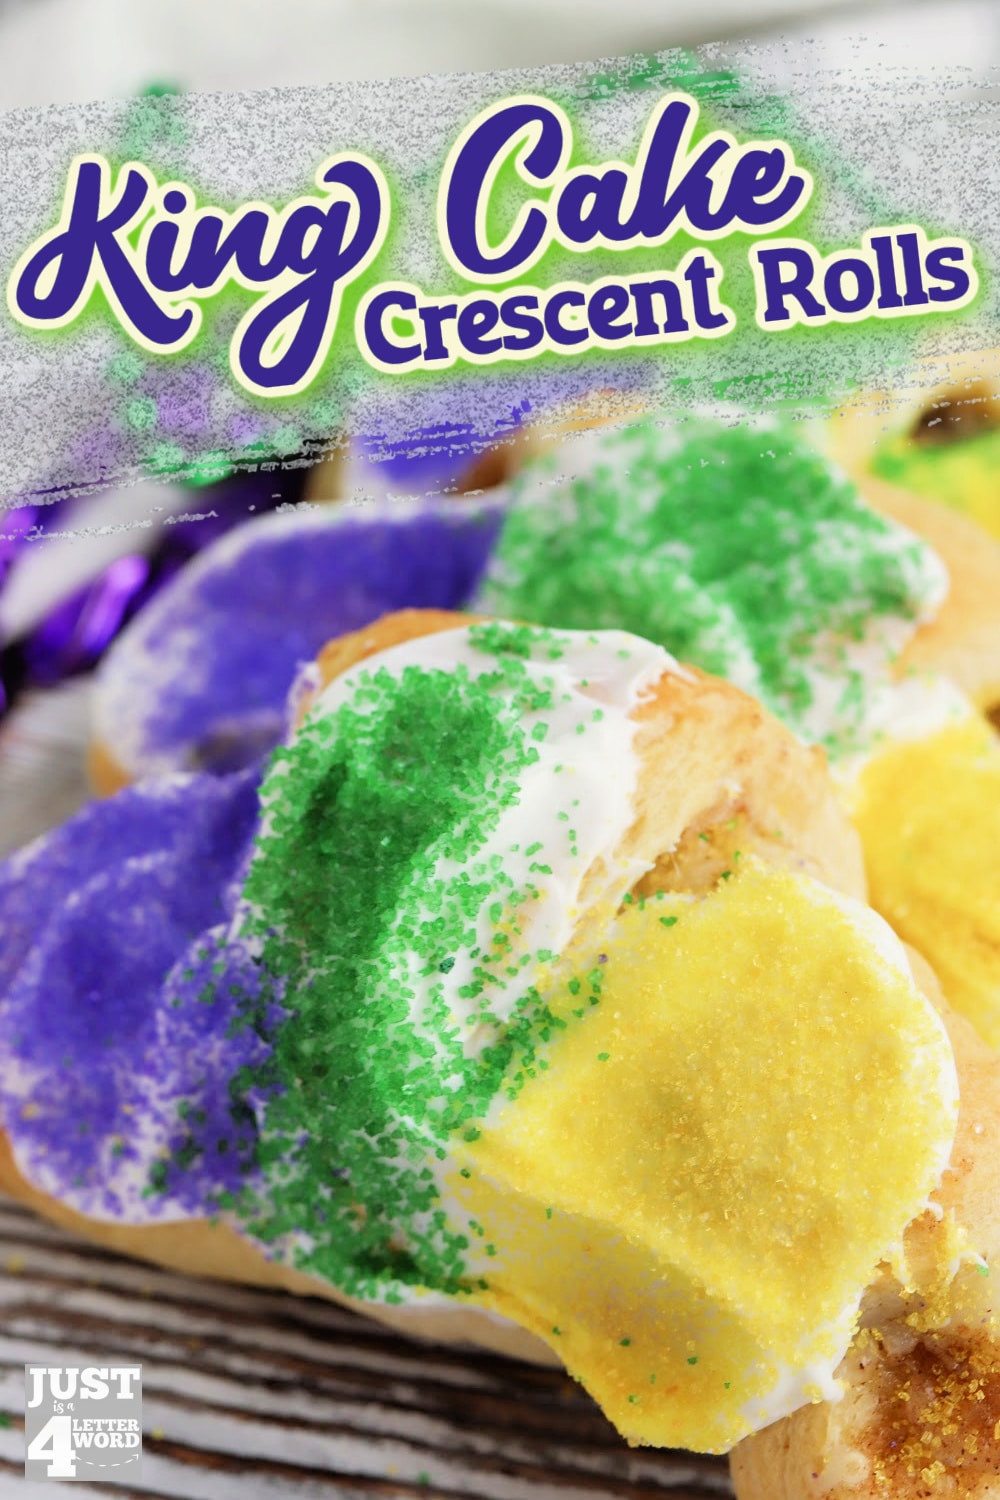 king cake crescent rolls image with text